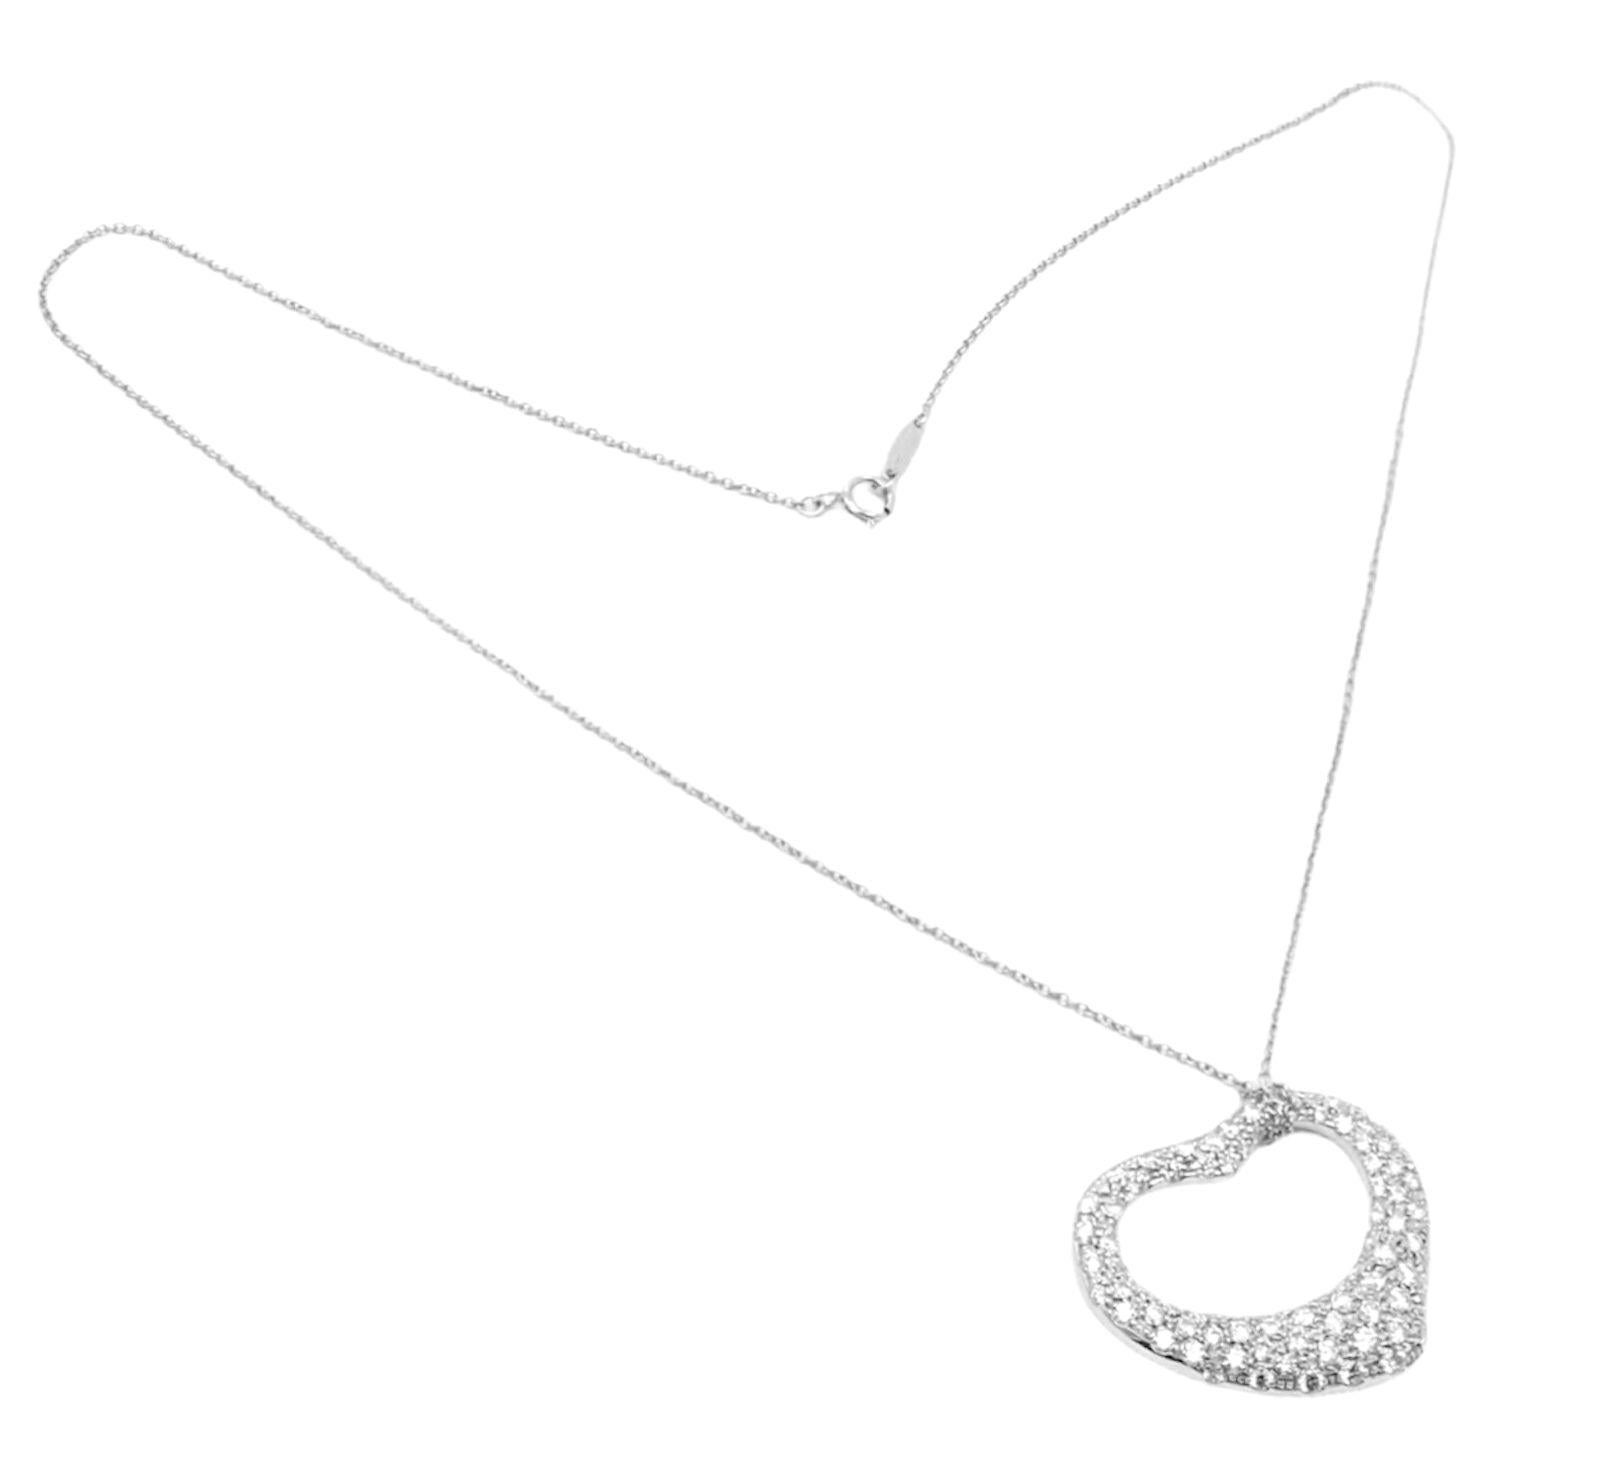 Platinum Diamond Large Open Heart Pendant Necklace by Elsa Peretti for Tiffany & Co.
With Diamonds VS1 clarity, G color total weight approx. 3.00ct
Retail Price: $24,000 plus tax.
Details:
Length: 17